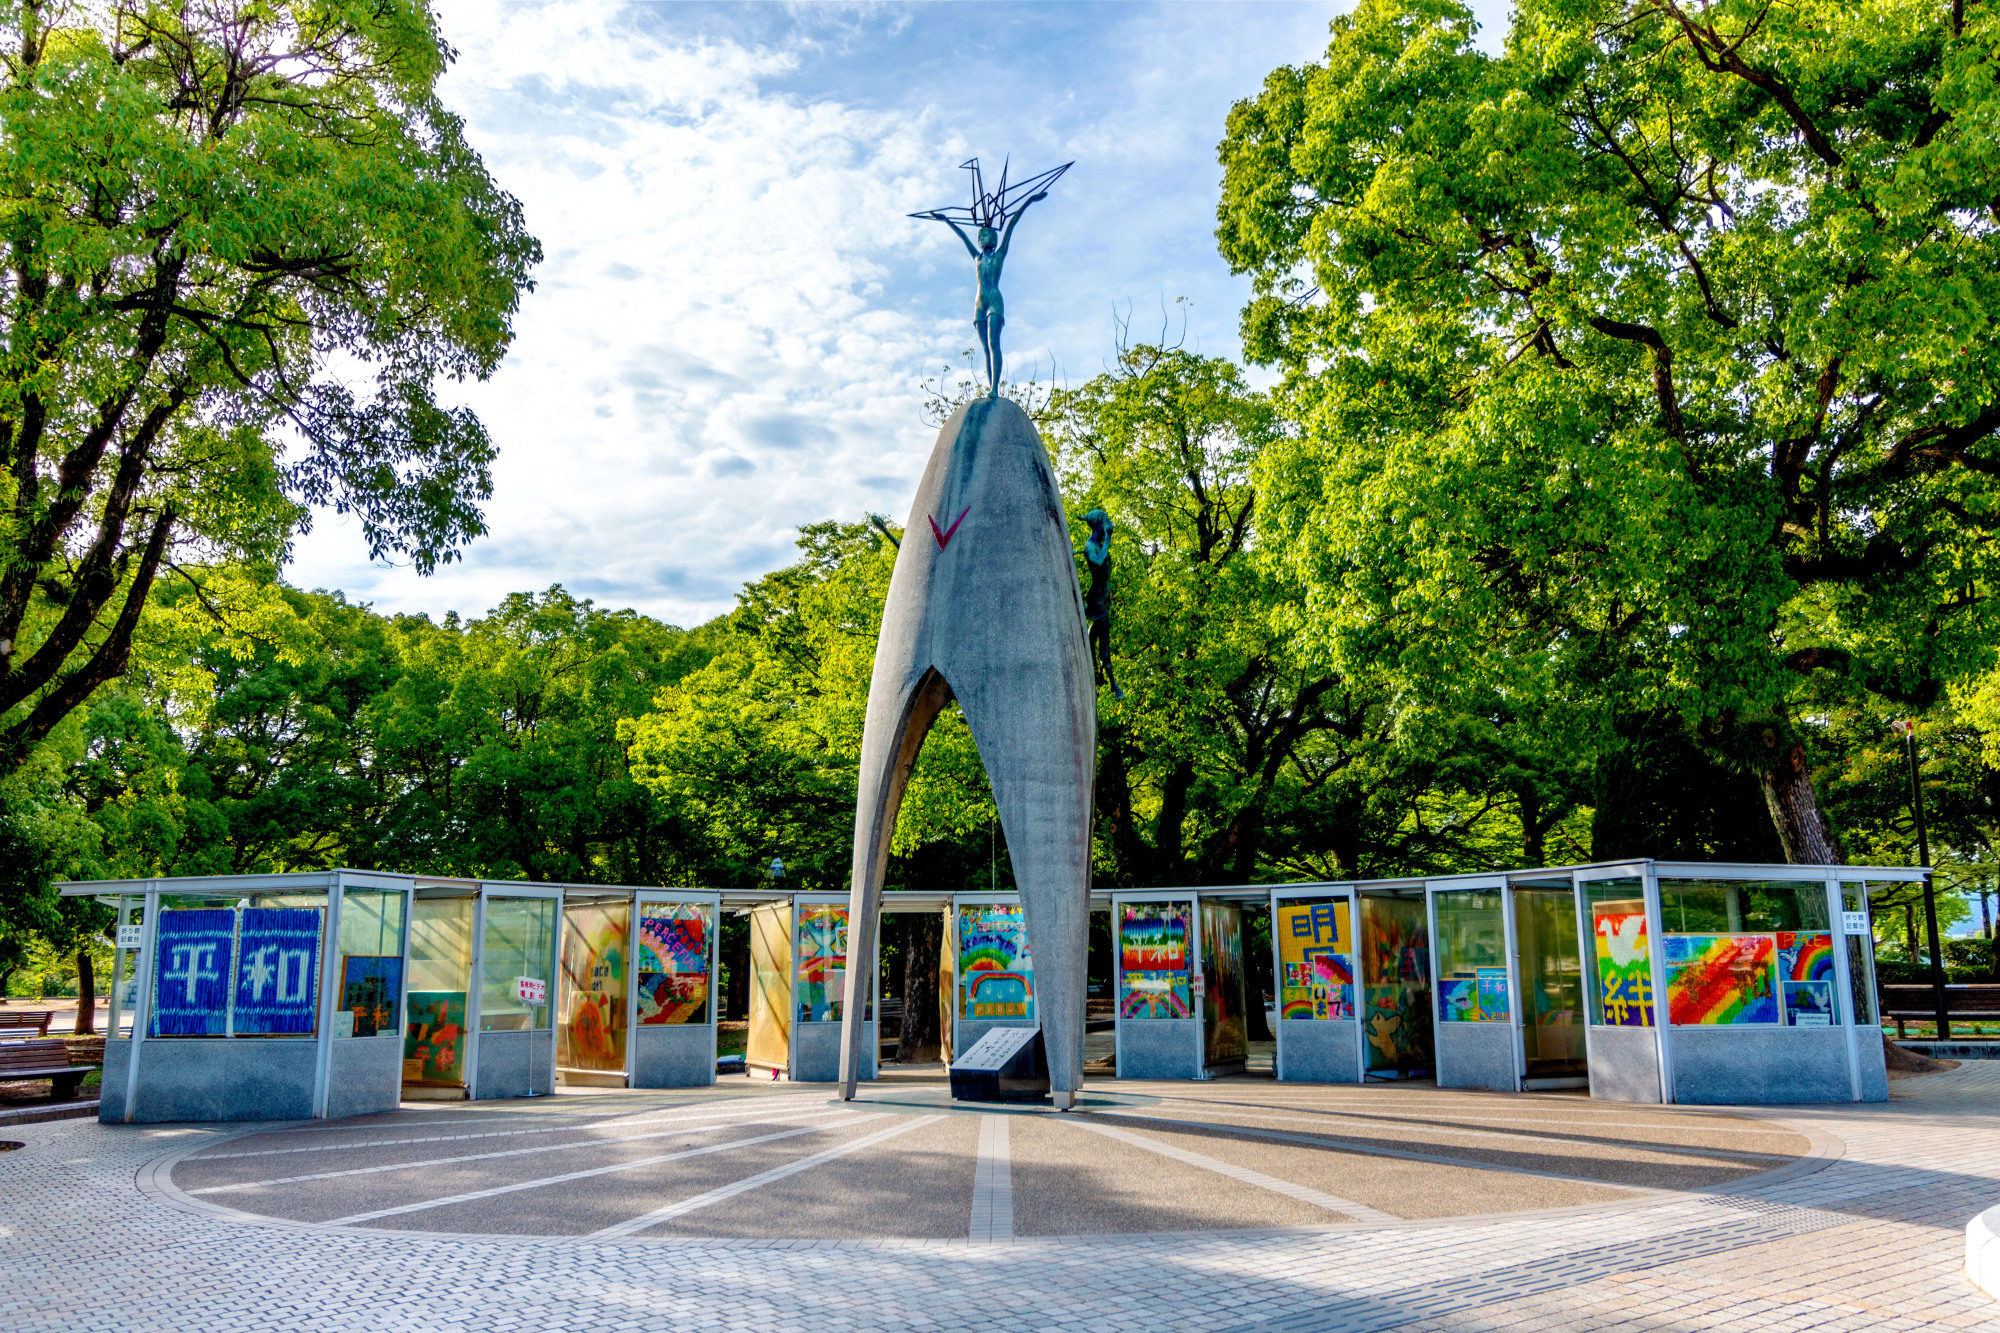 Left: The Children's Peace Monument, topped by the figure of Sadako Sasaki, is surrounded by paper cranes donated to Hiroshima's Peace Memorial Park from around the world. The nine booths surrounding the monument were installed by the city in 2002 to protect the cranes. | PETER CHORDAS